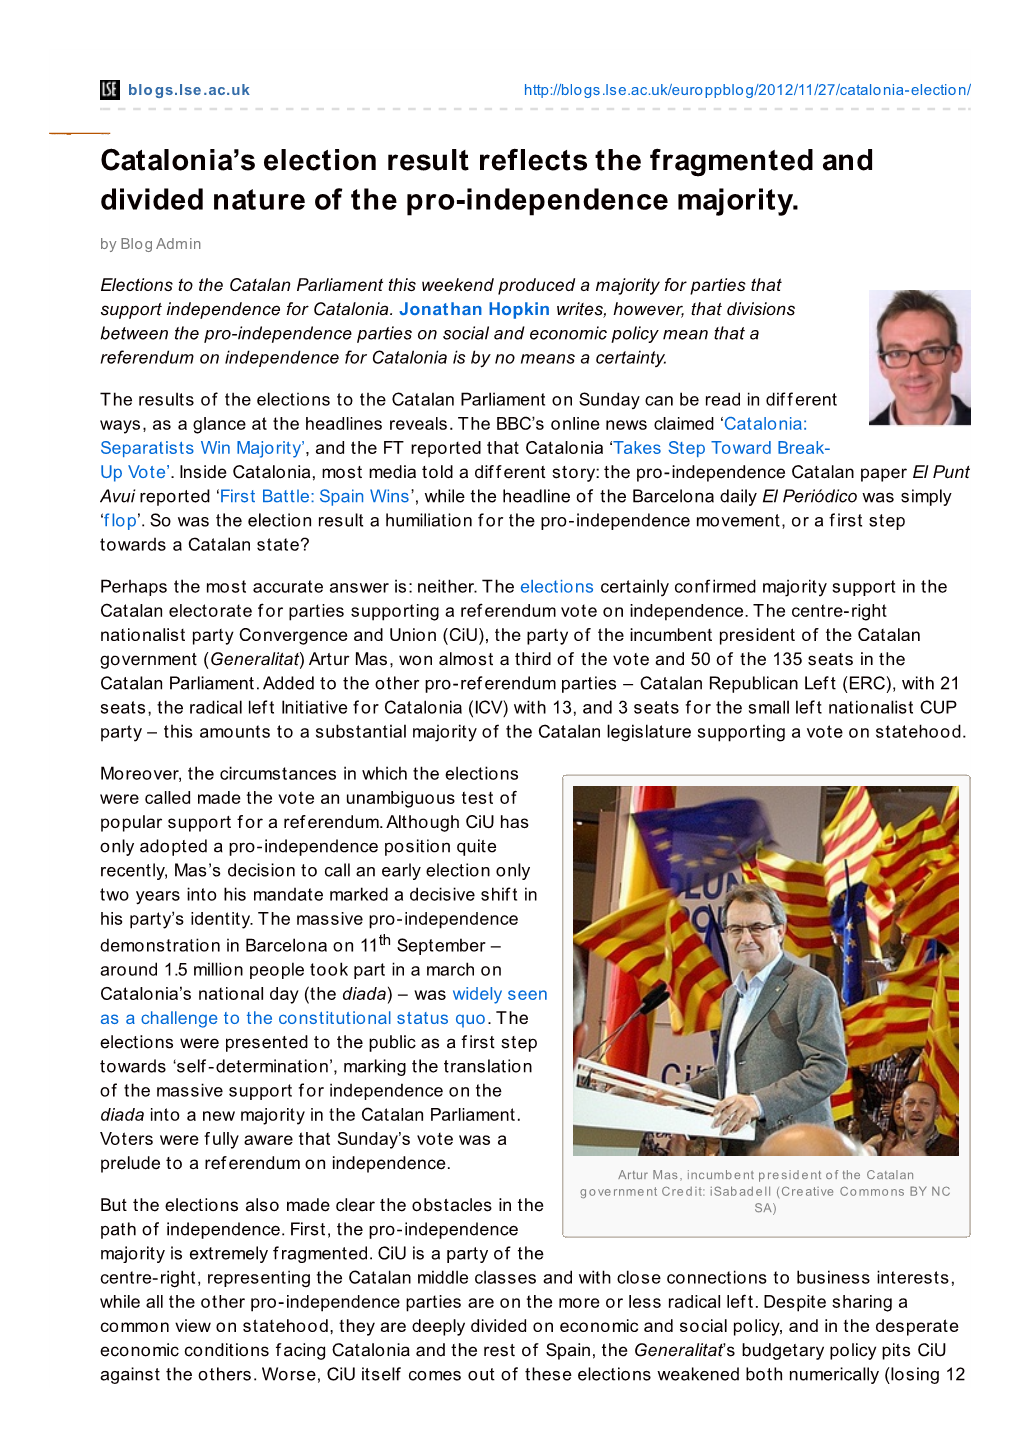 Catalonia's Election Result Reflects the Fragmented and Divided Nature Of